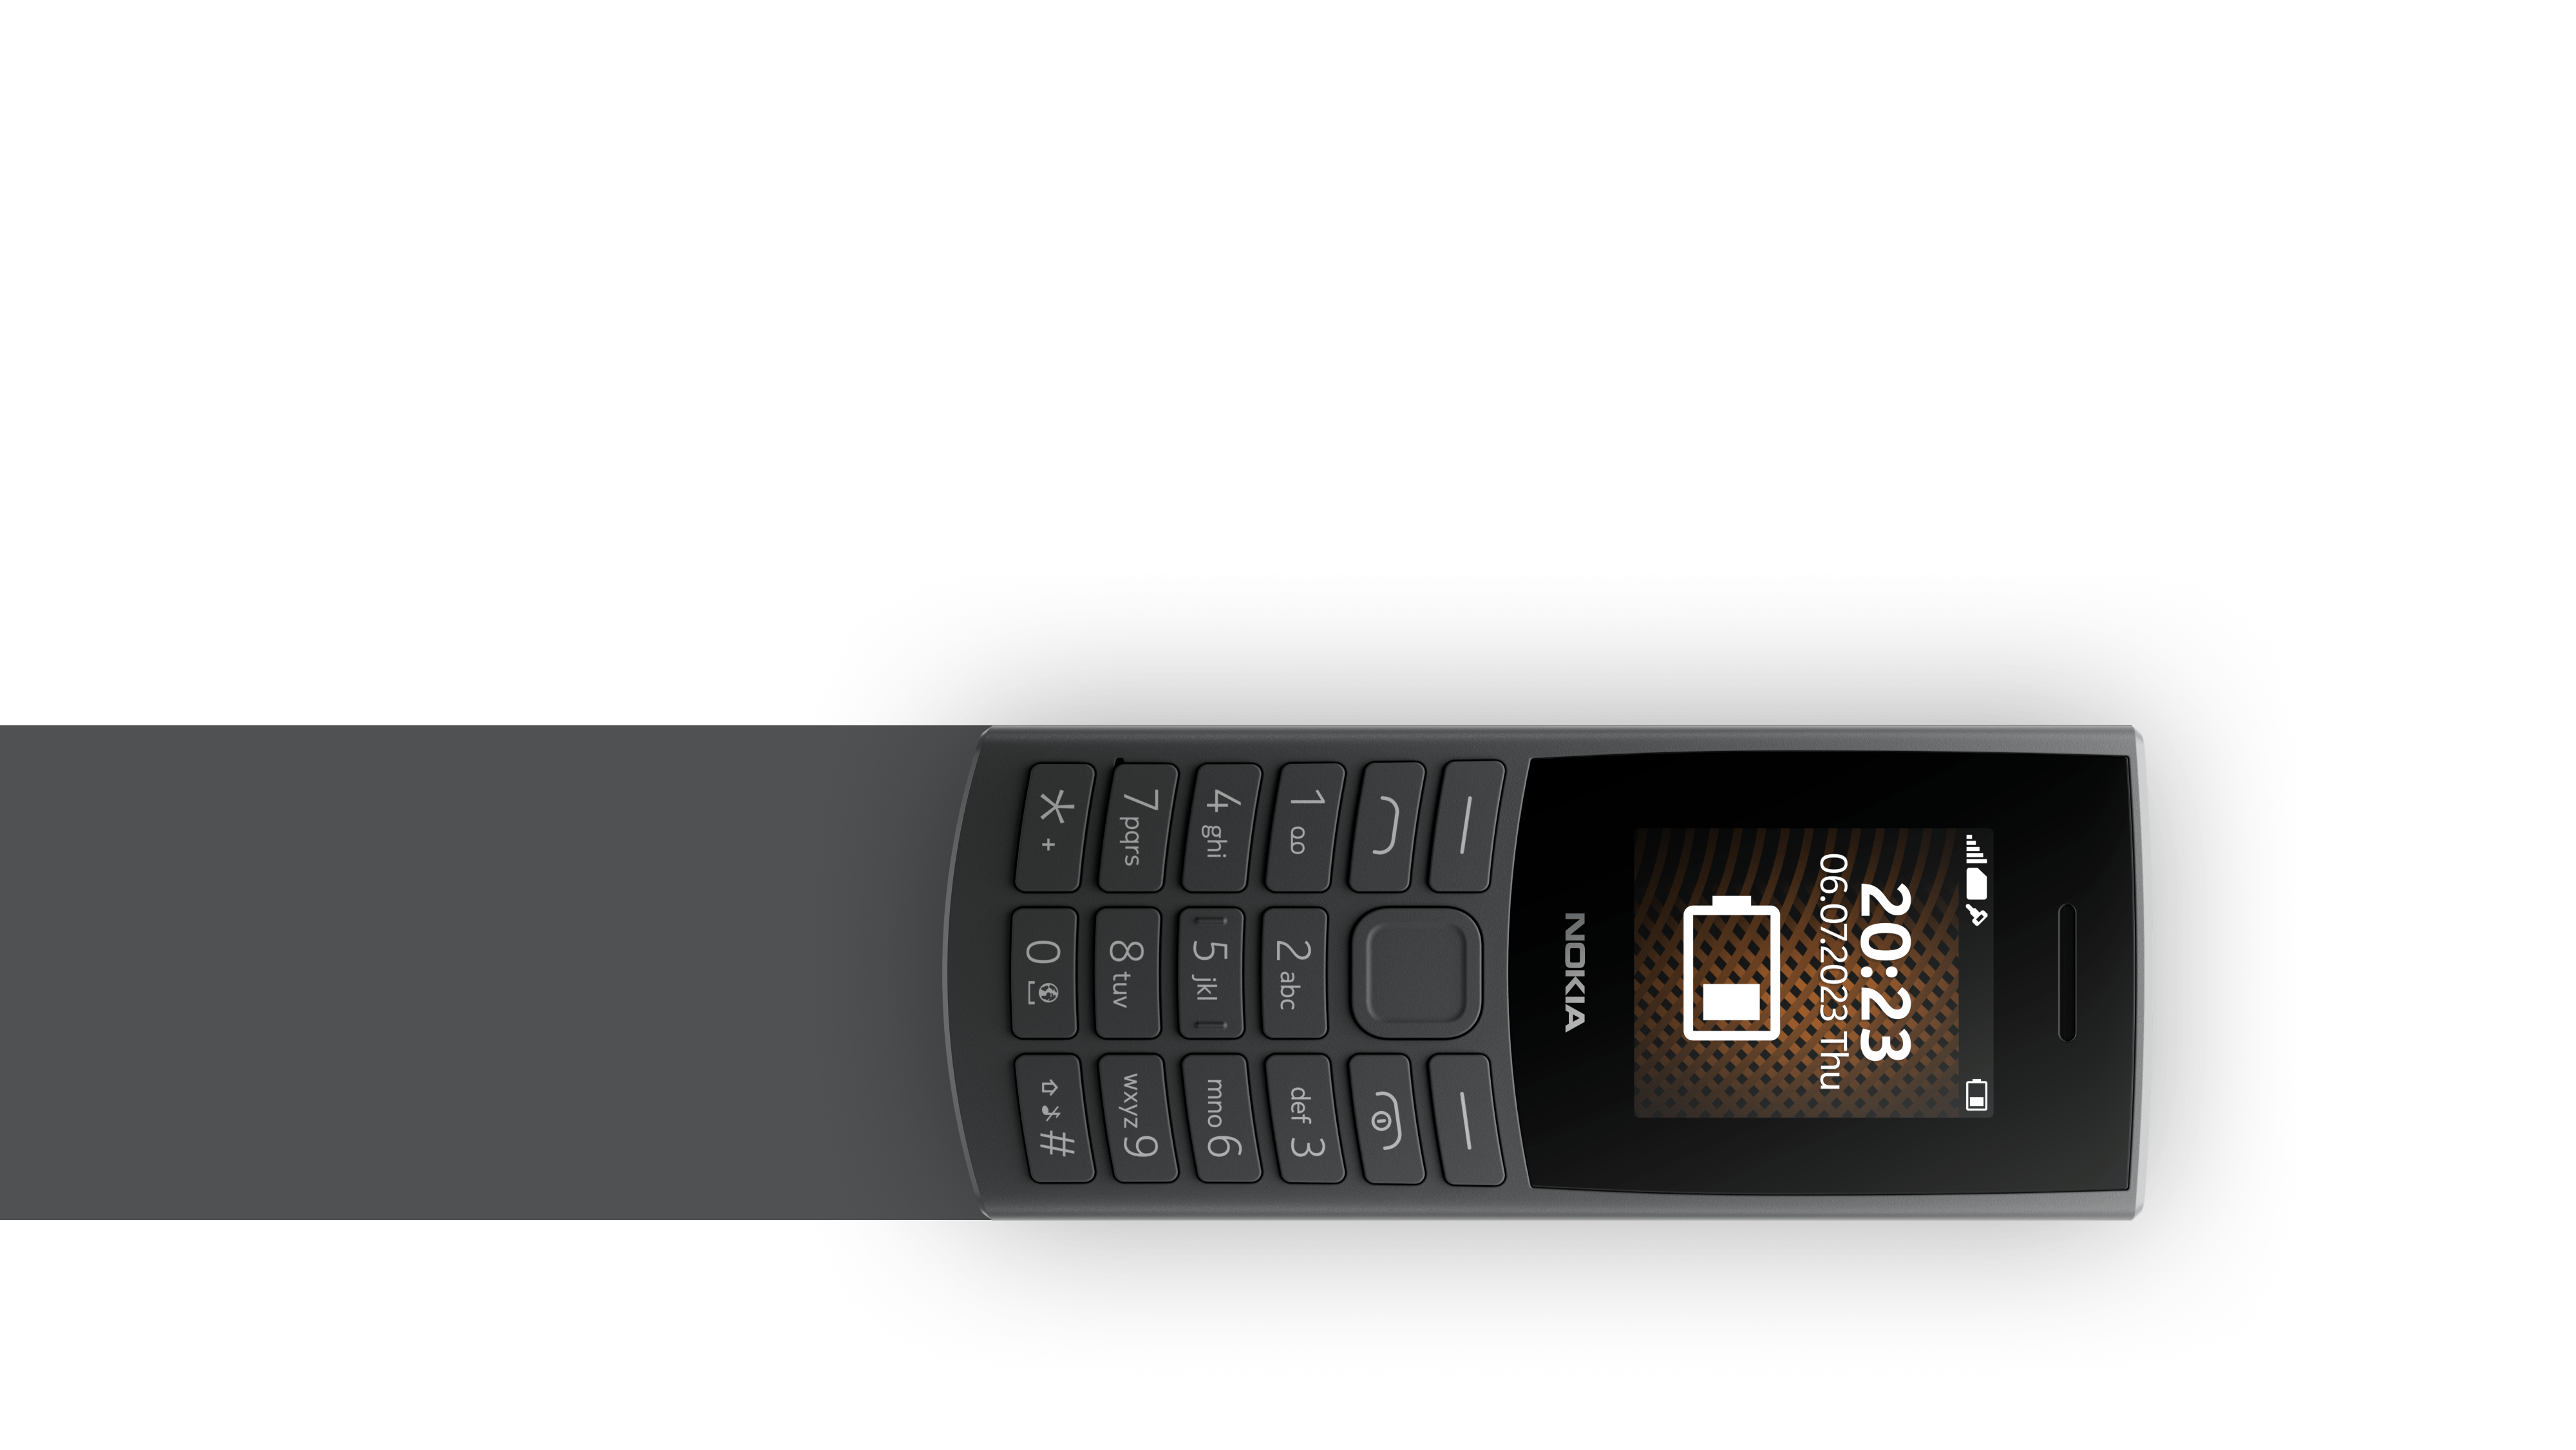 Nokia 105 with 4G phone feature internet